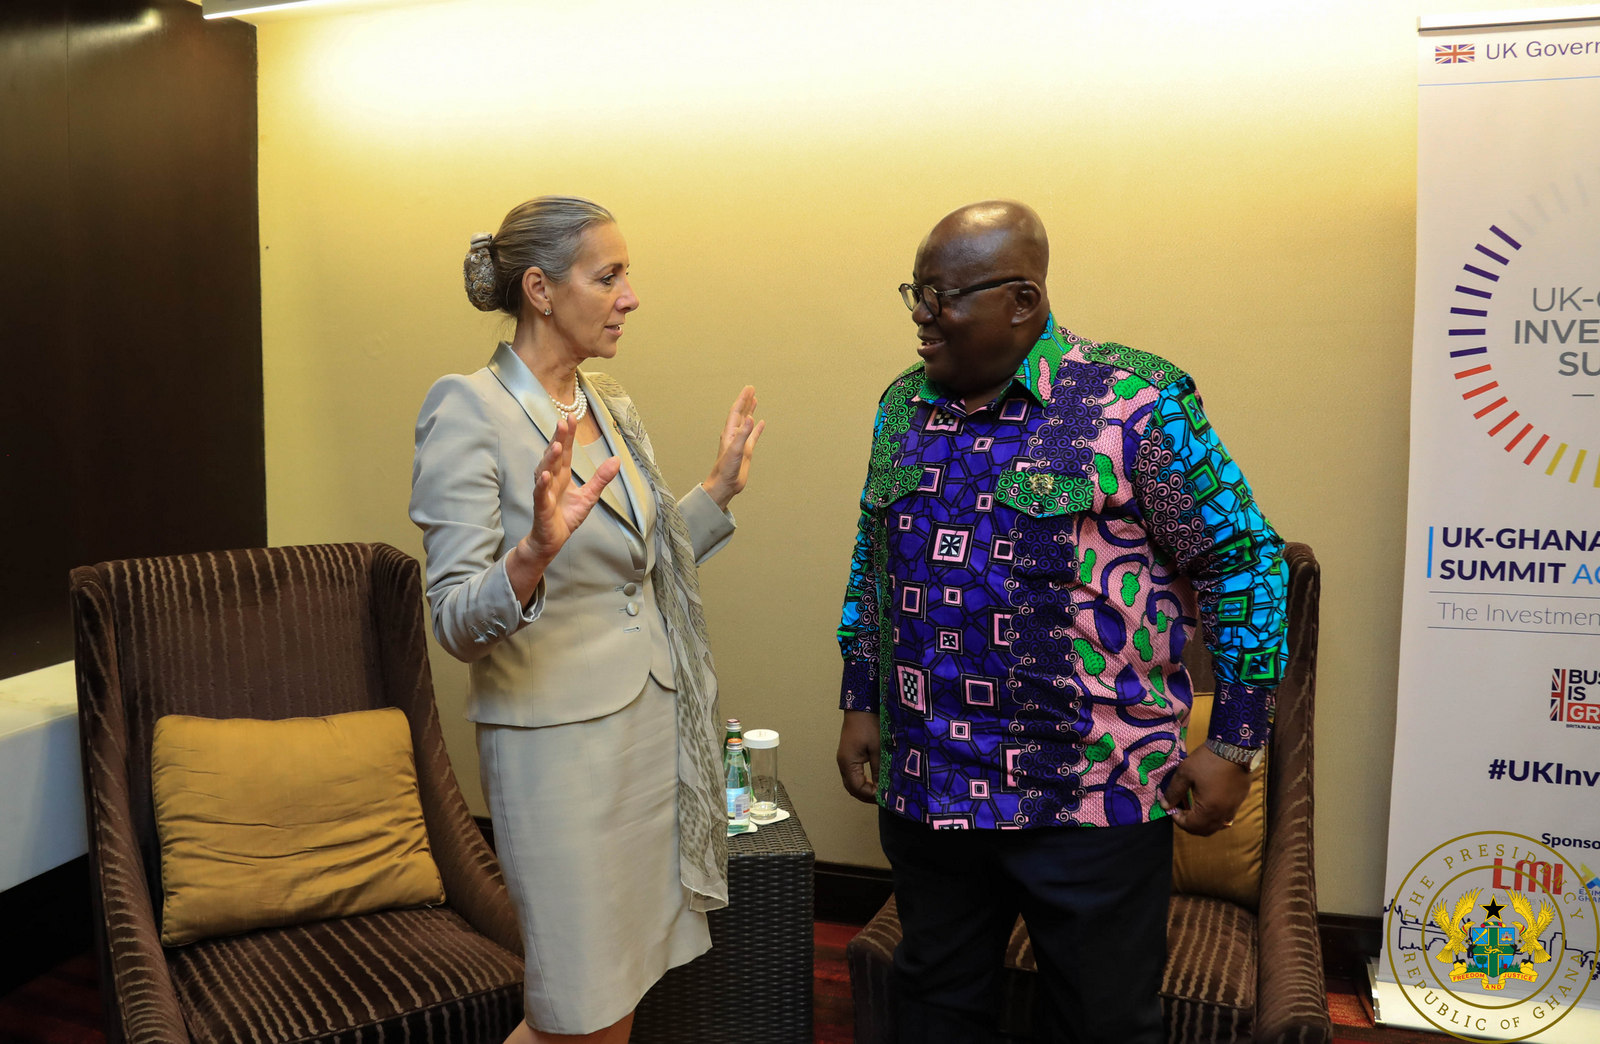 President Akufo-Addo with the UK Minister of State for Africa Harriet Baldwin